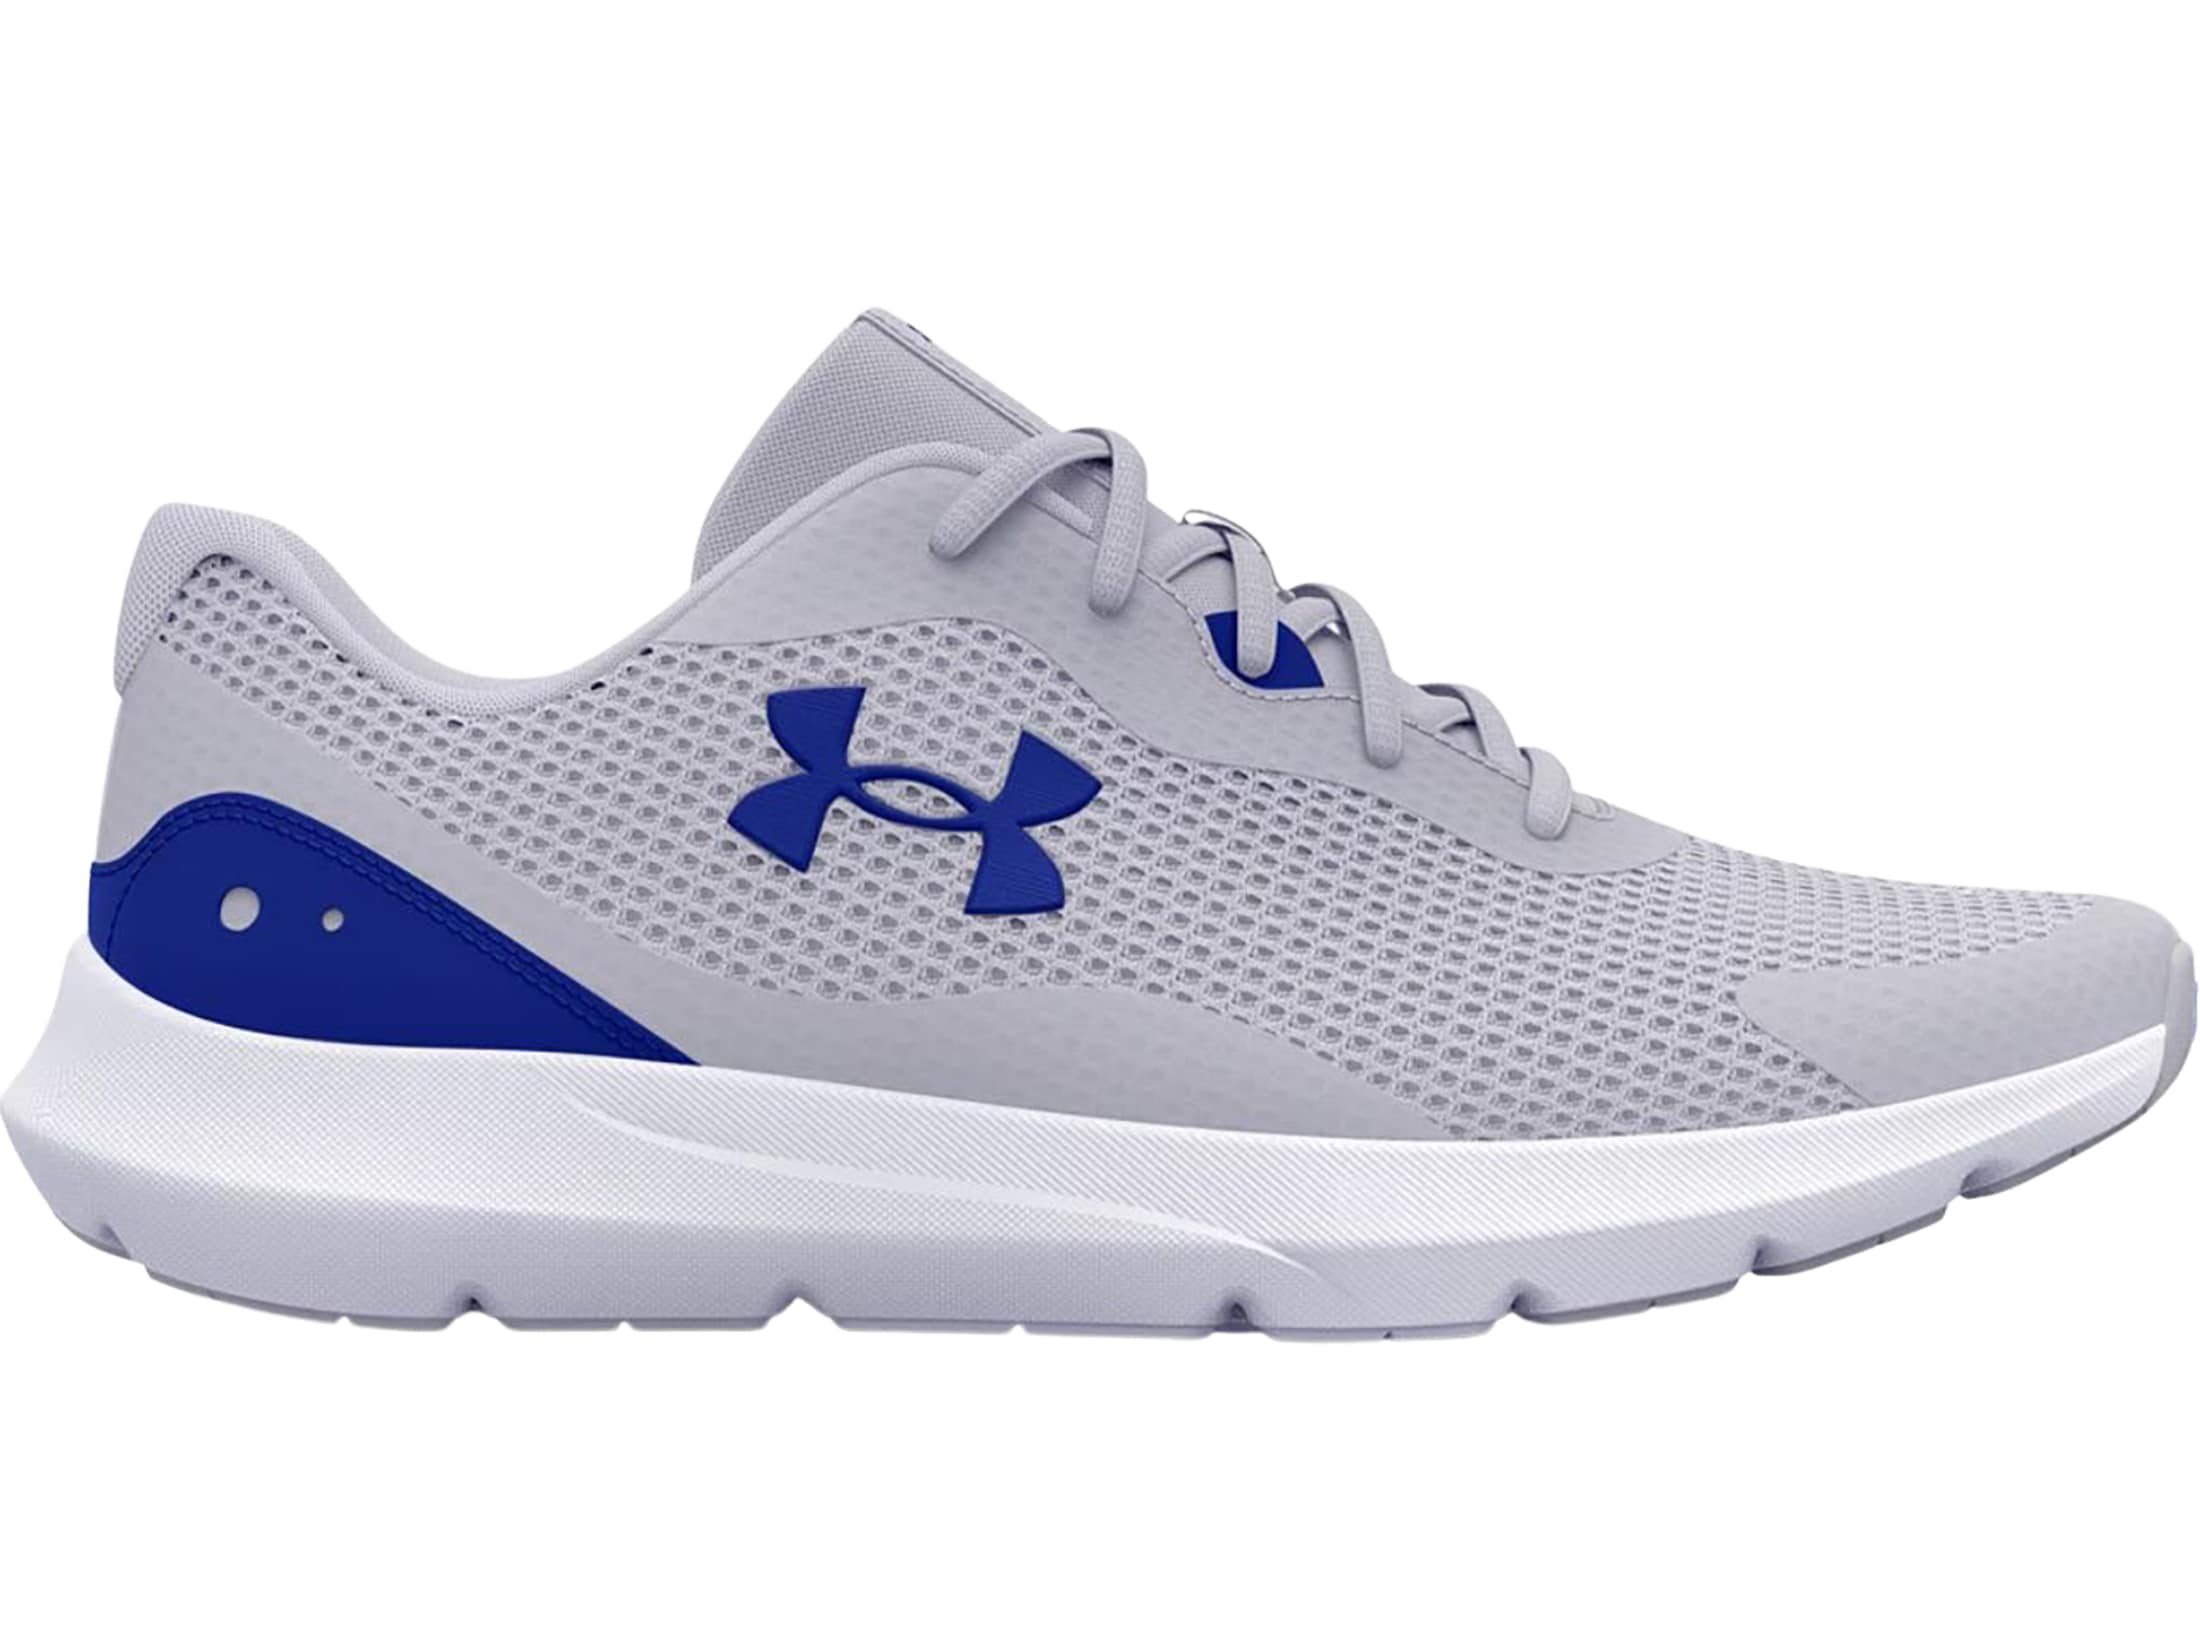 Under Armour Surge 3 Running Shoes Synthetic Mod Gray/White/Royal